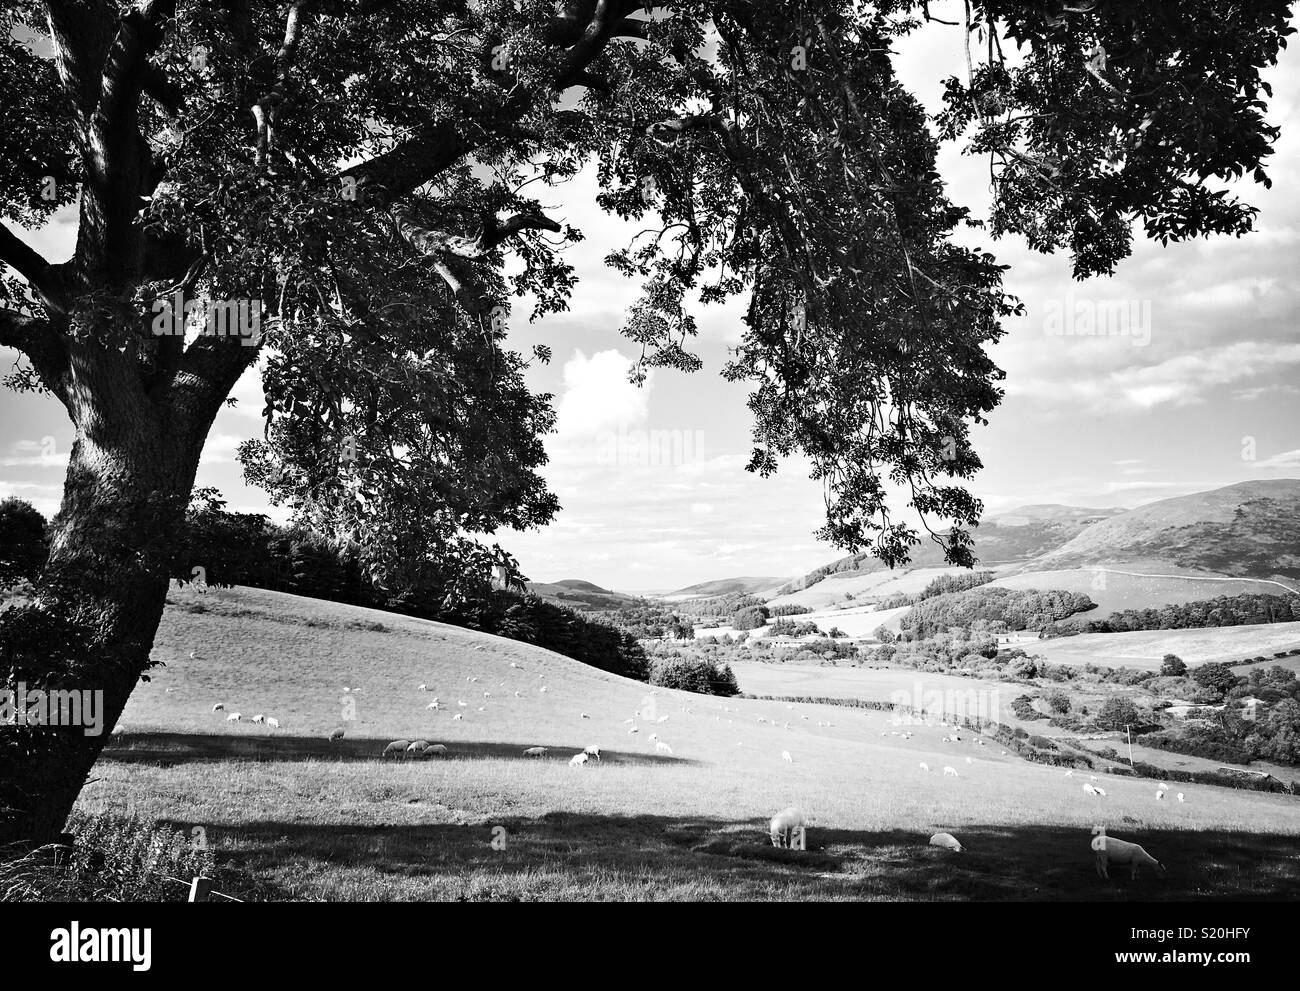 B&W Hipstamatic shot of bucolic rural scene with soft rolling hills, sheep and stone walls Stock Photo